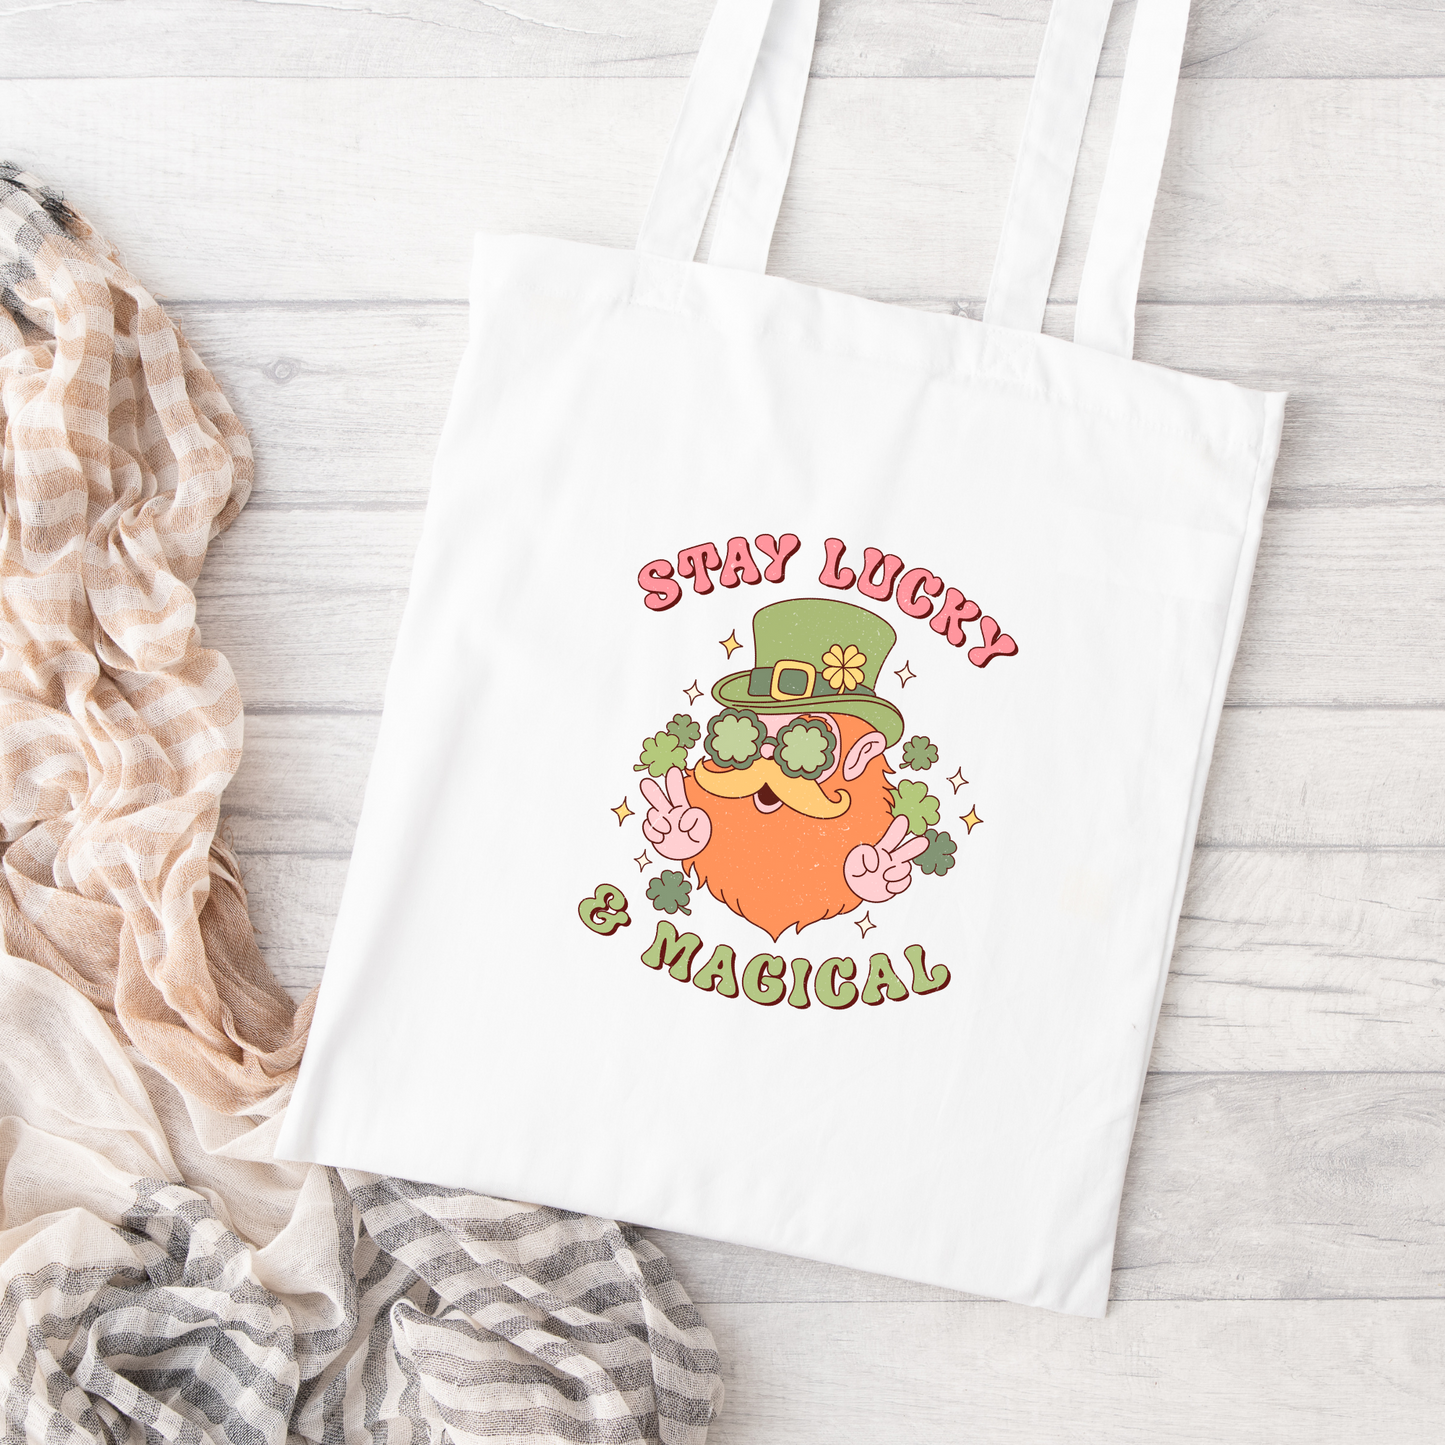 Stay Lucky And Magical Tote Bag, Reusable Tote Bag, St Patricks Day Tote Bag